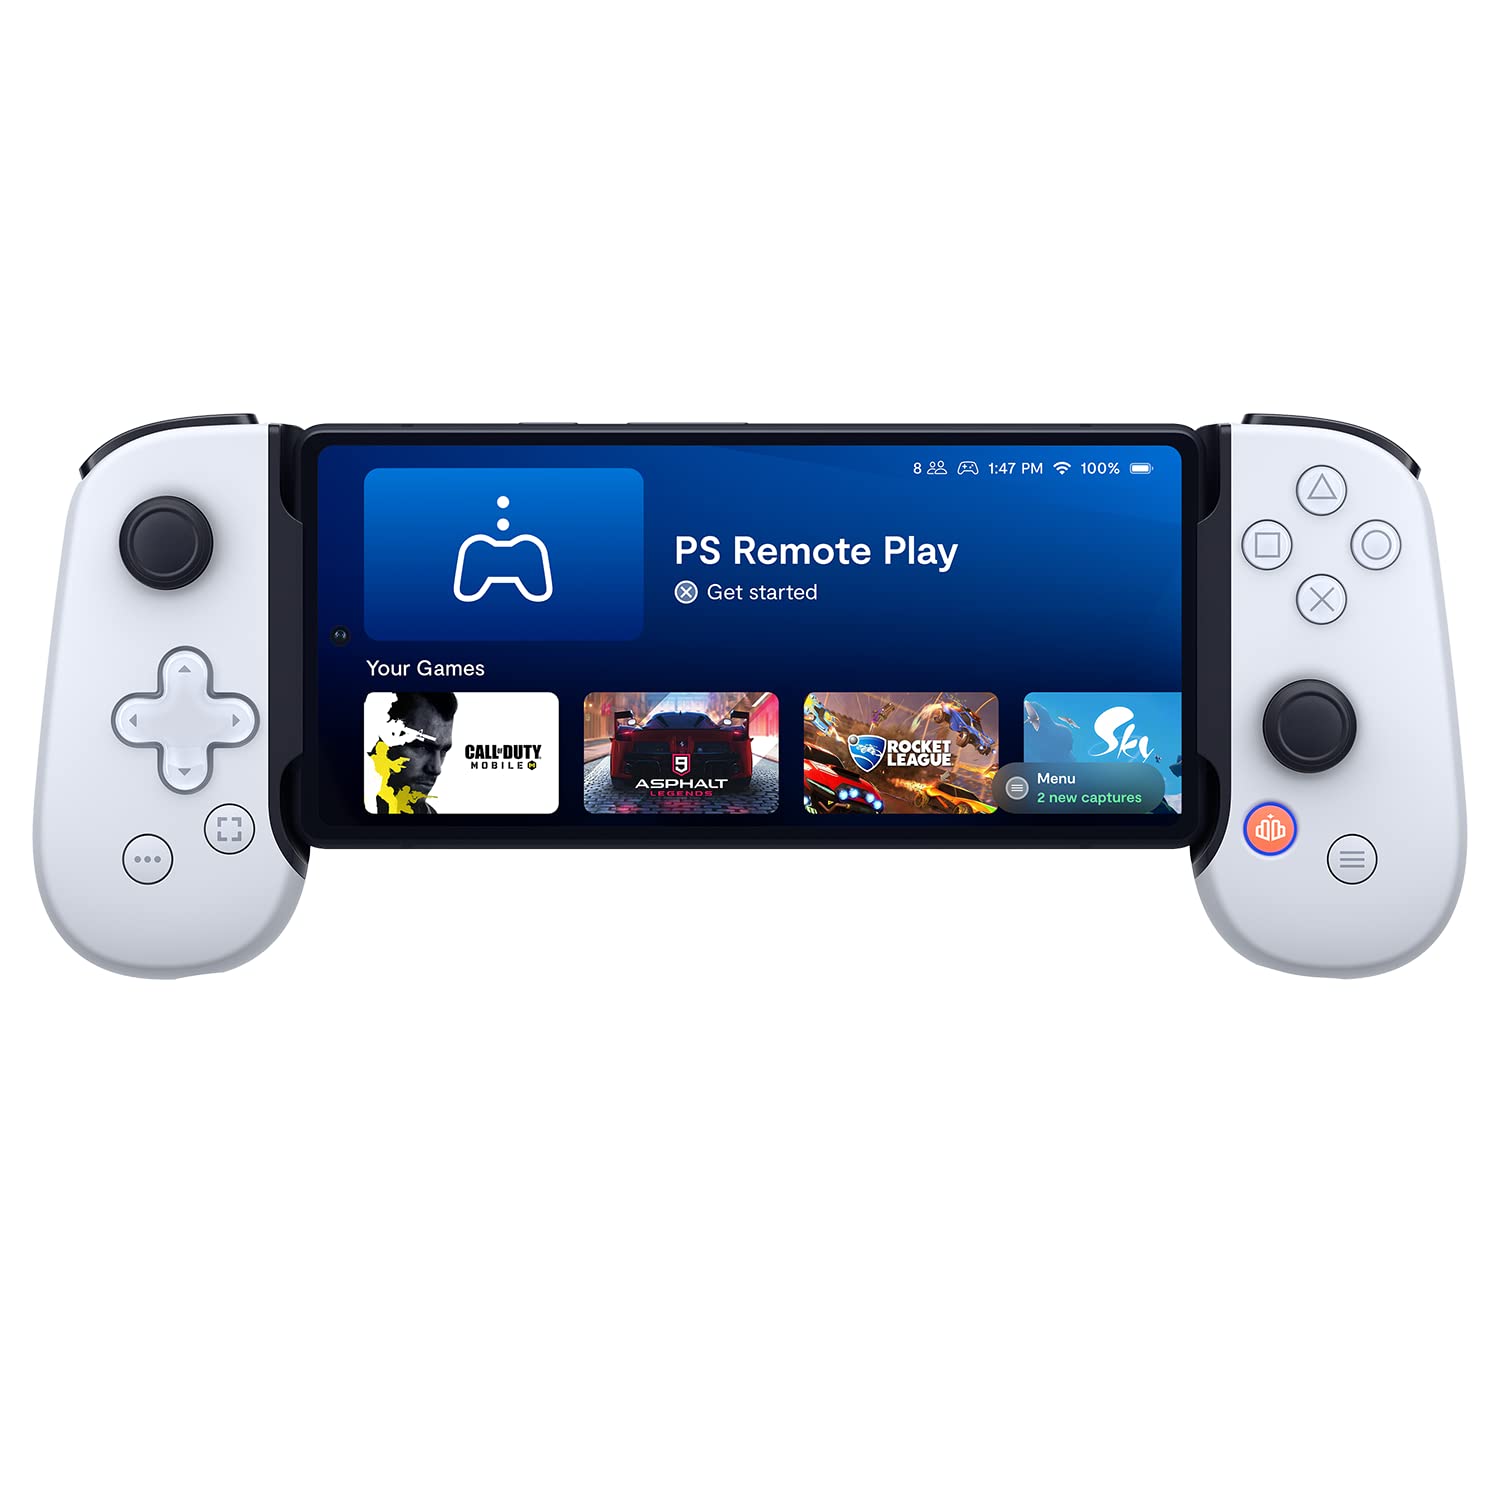 Prime members: BACKBONE One Mobile Gaming Controller for Android PlayStation/Standard Edition - $69.99